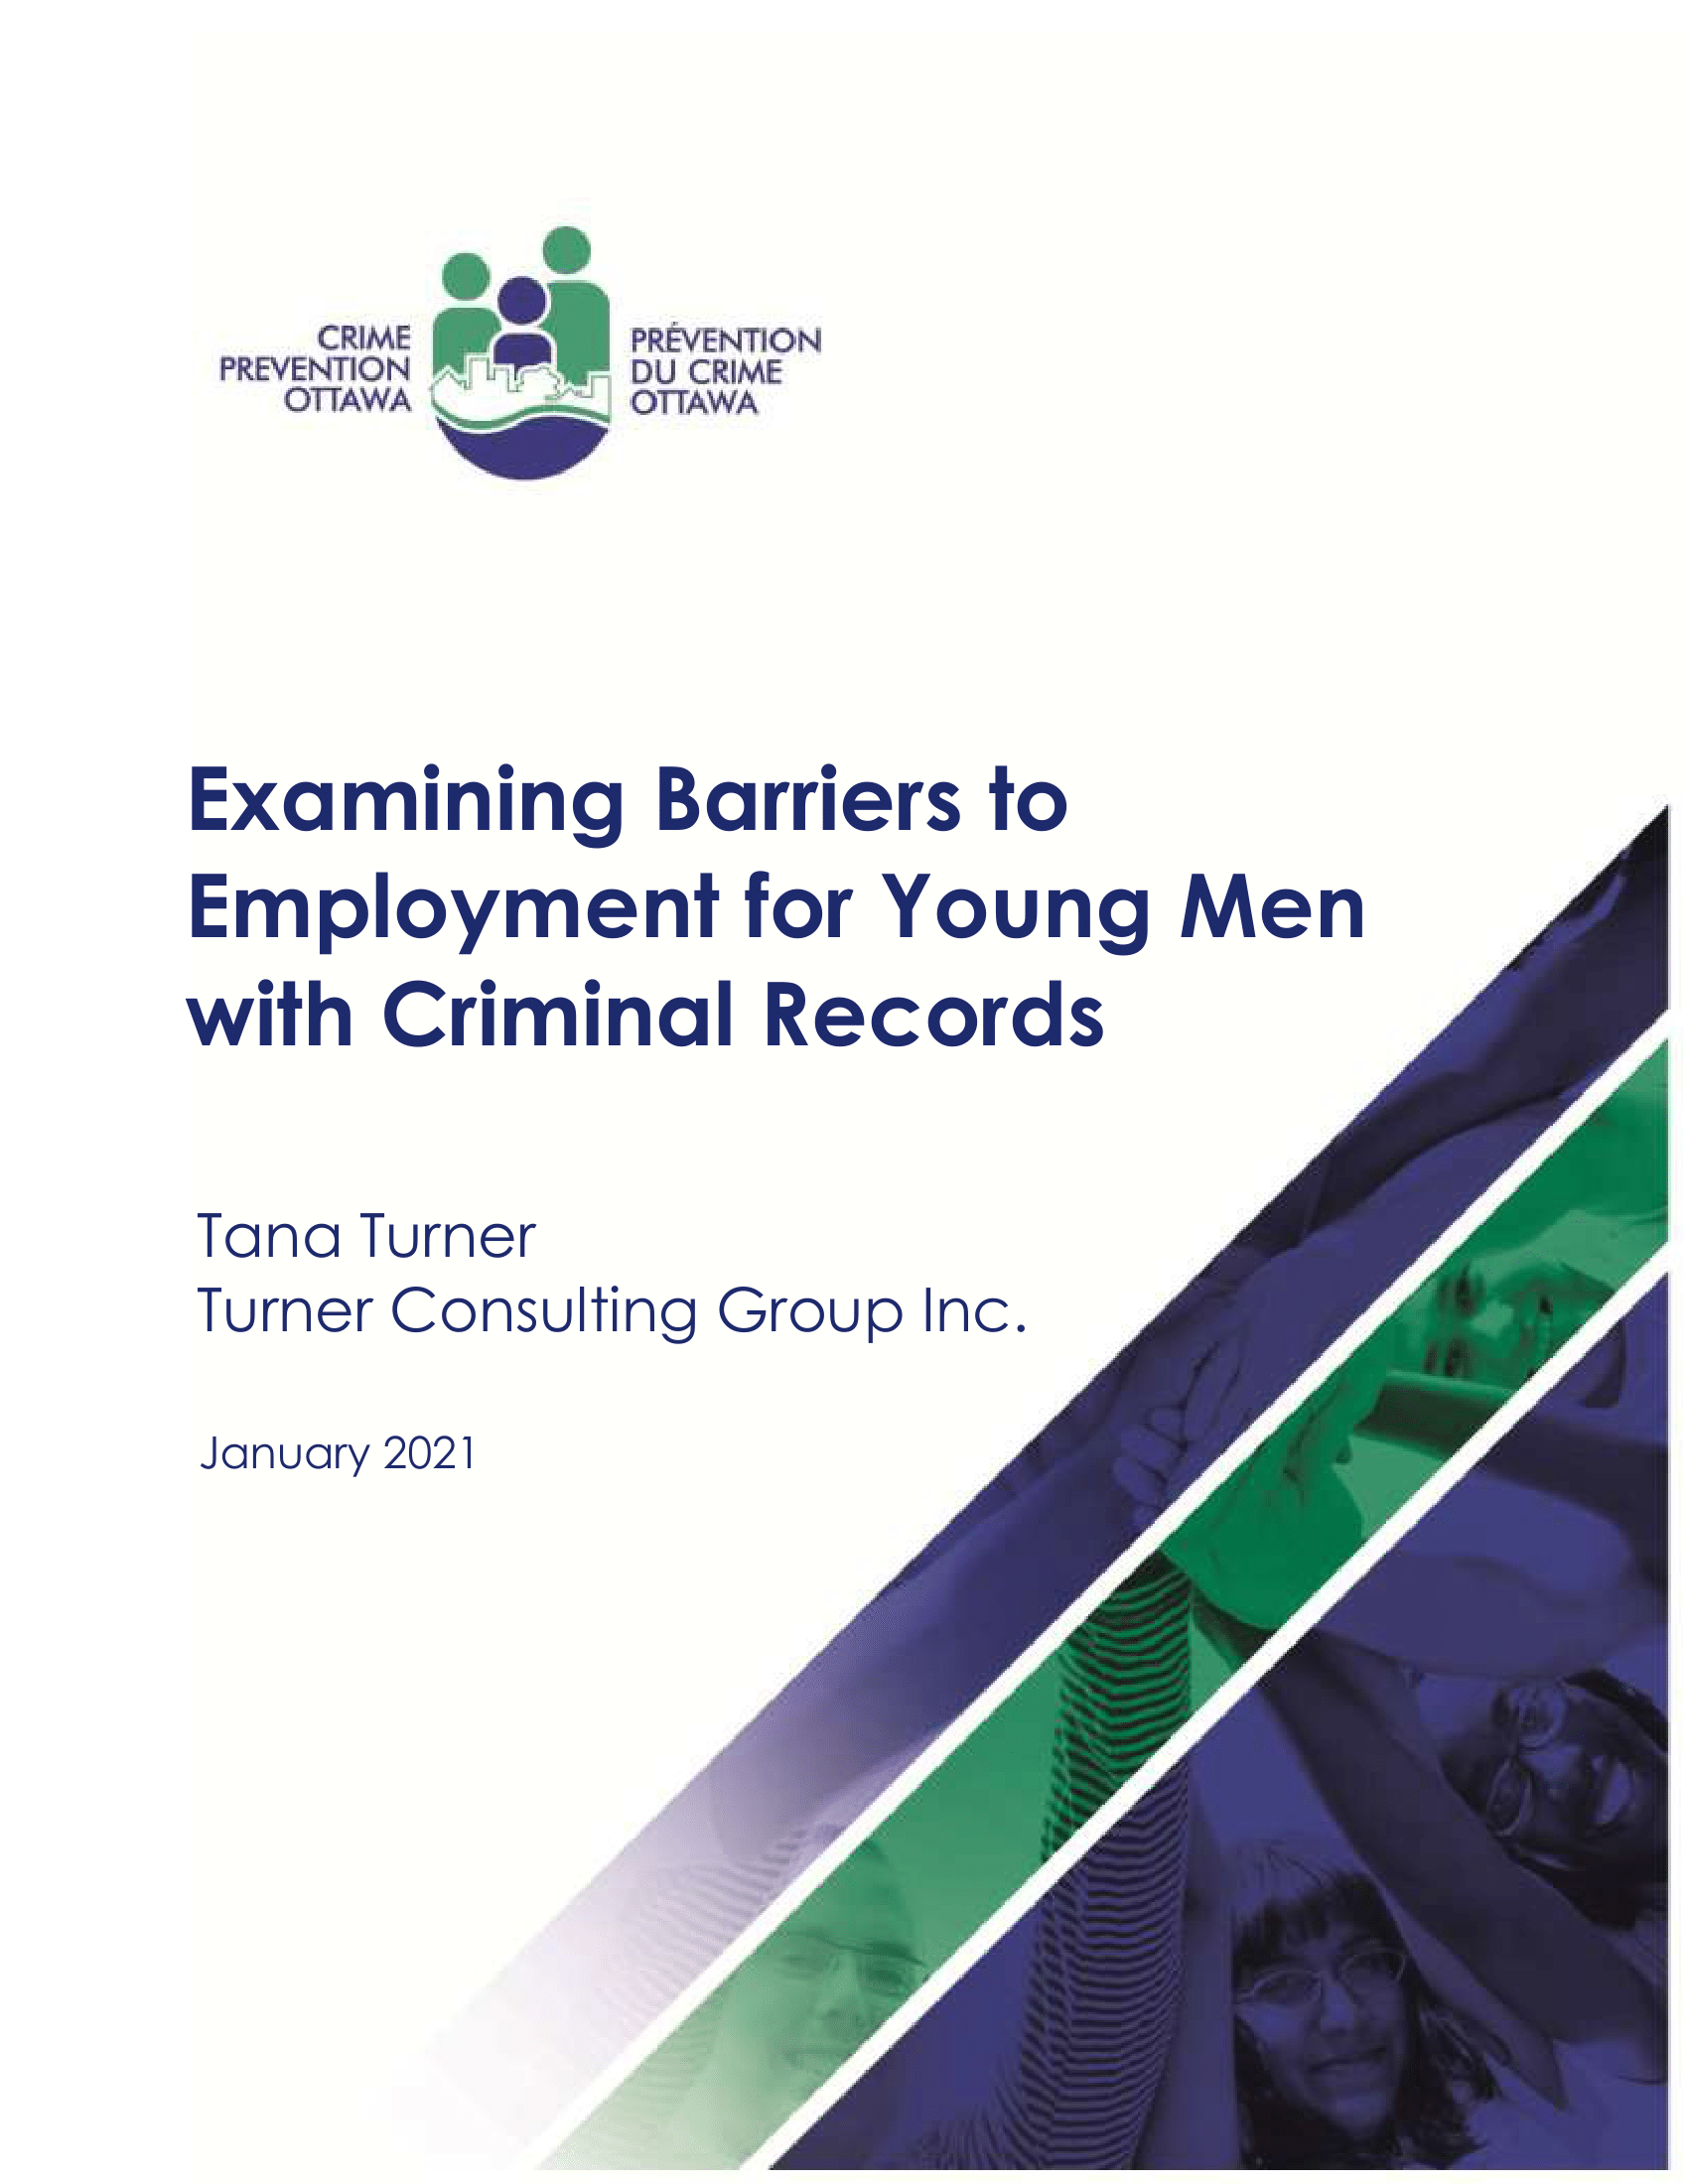 Examining Barriers to Employment for Young Men with Criminal Records